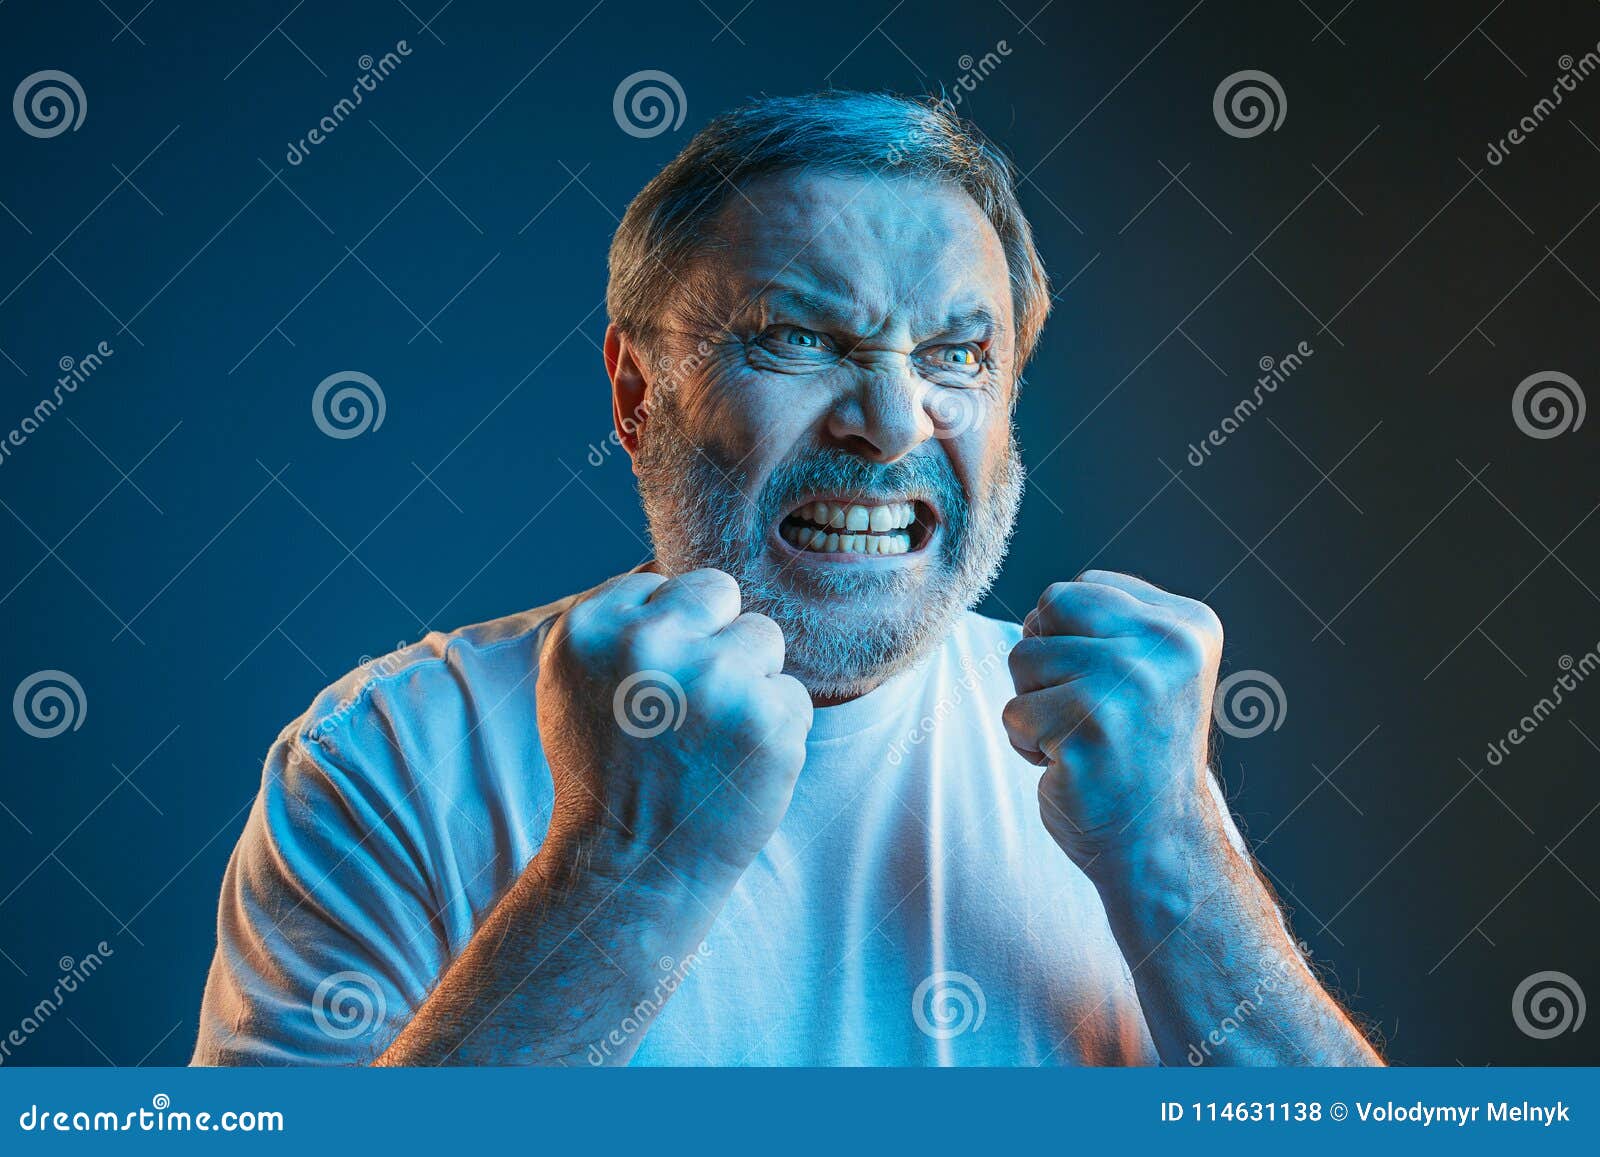 the senior emotional angry man screaming on blue studio background